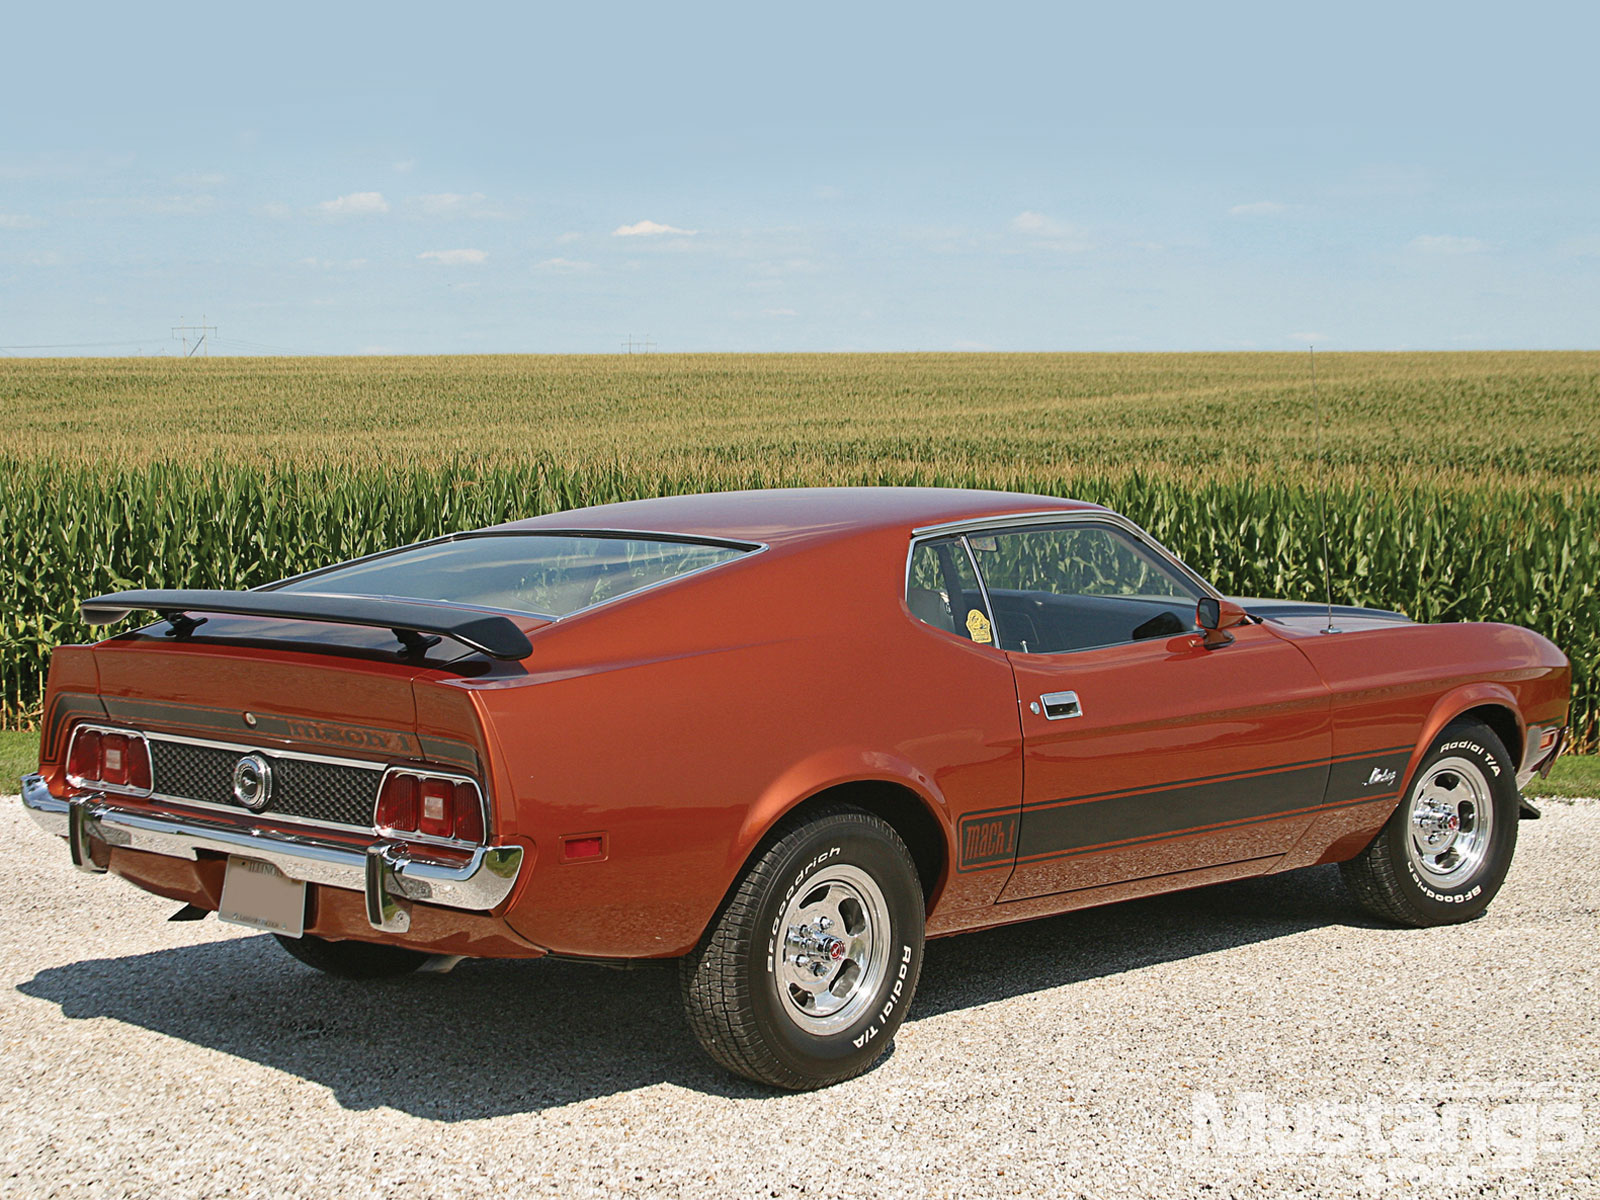 ford mustang mach 1, vehicles, classic car, fastback, ford, muscle car